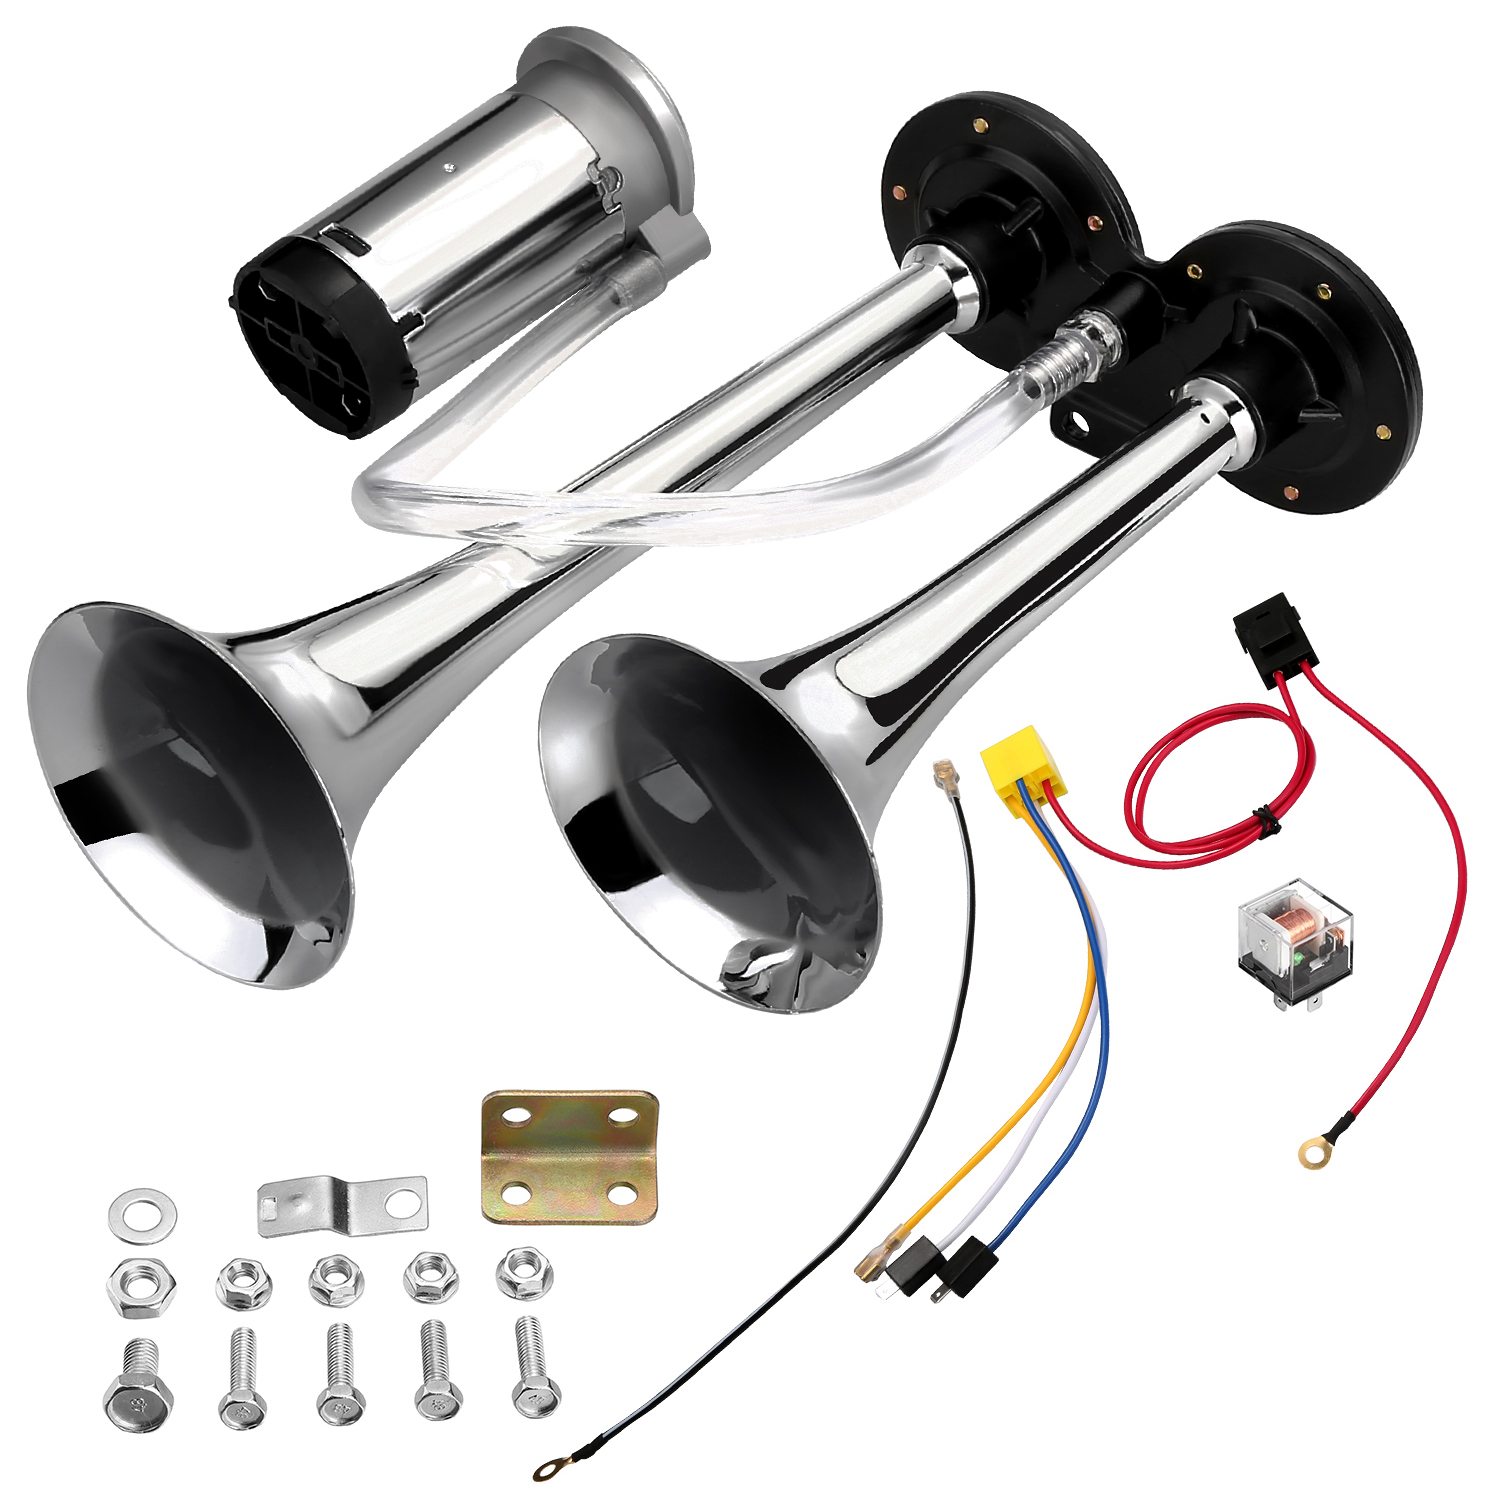 HK 12V 150dB Car Air Horn Kit, Super Loud Twin Tone Chrome Plated Zinc Dual Trumpet Air Horn with Compressor for Any 12V Vehicles Car Truck RV Van SUV Motorcycle Off Road Boat (Silver)